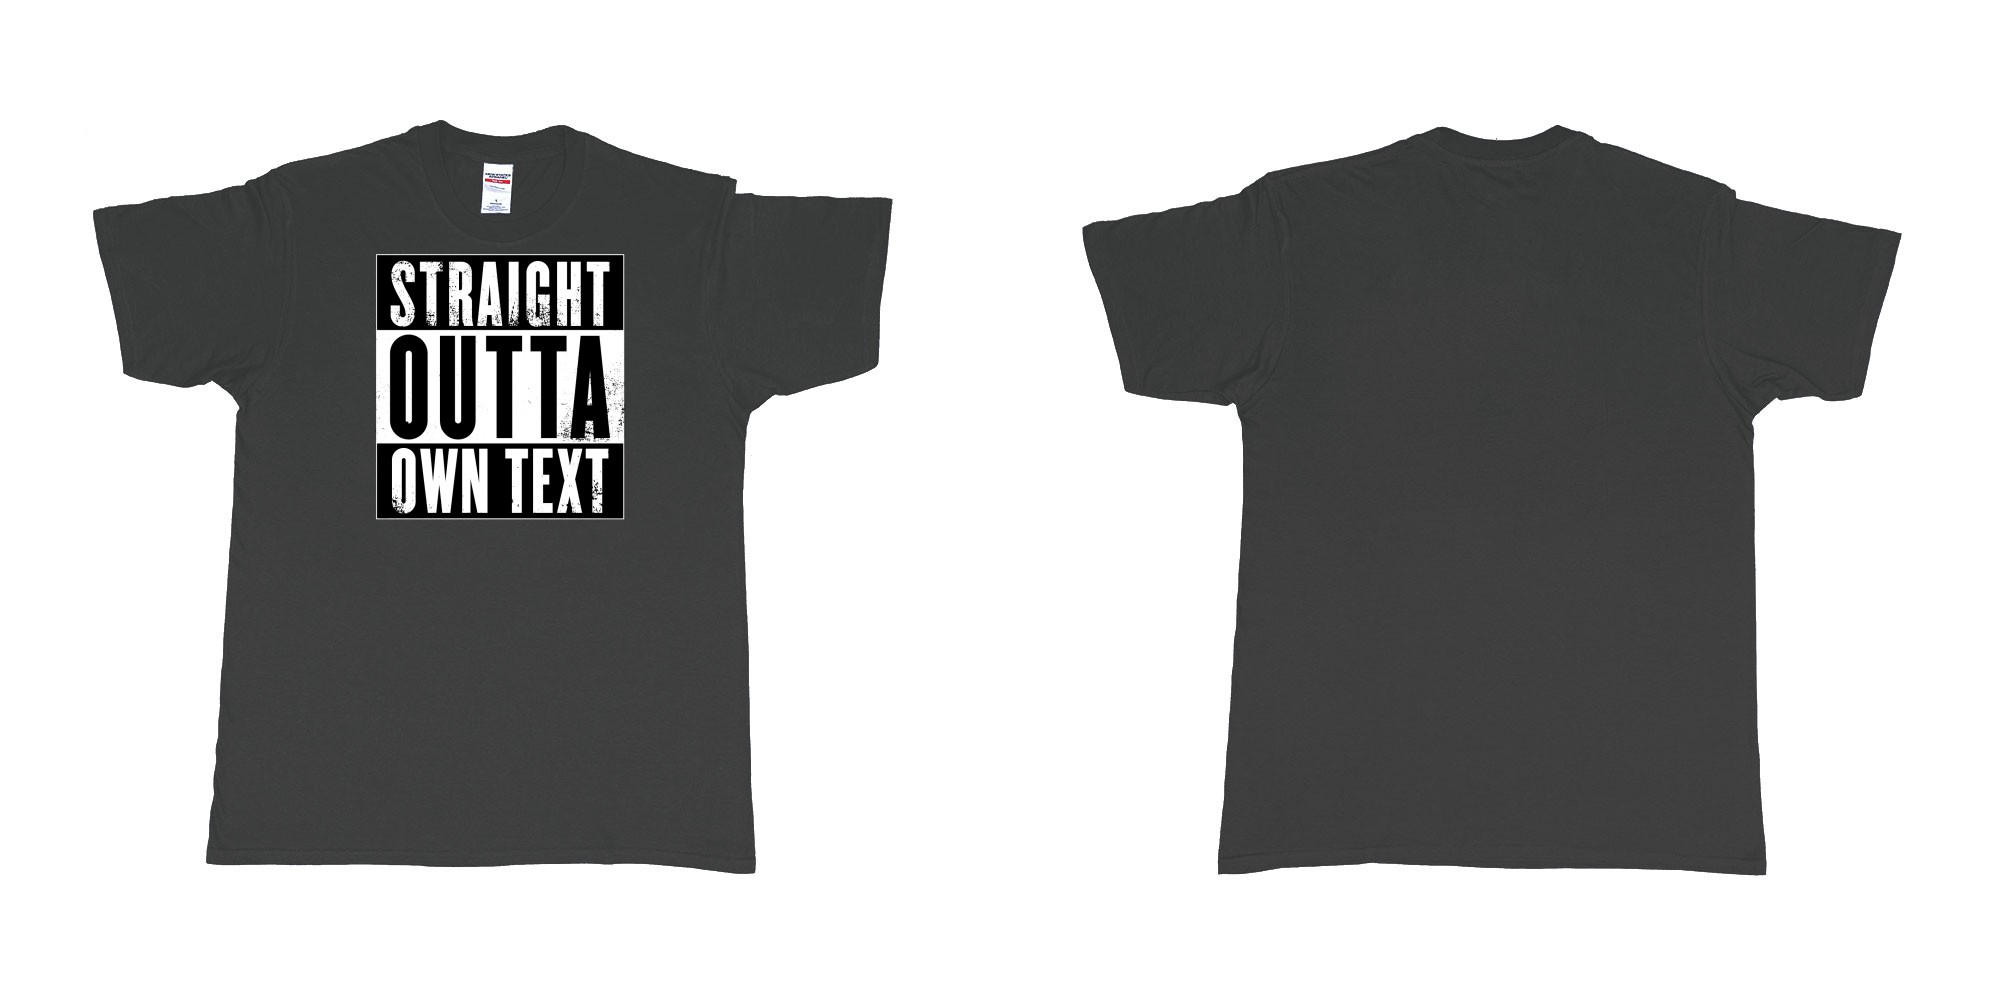 Custom tshirt design Straight Outta Compton in fabric color black choice your own text made in Bali by The Pirate Way